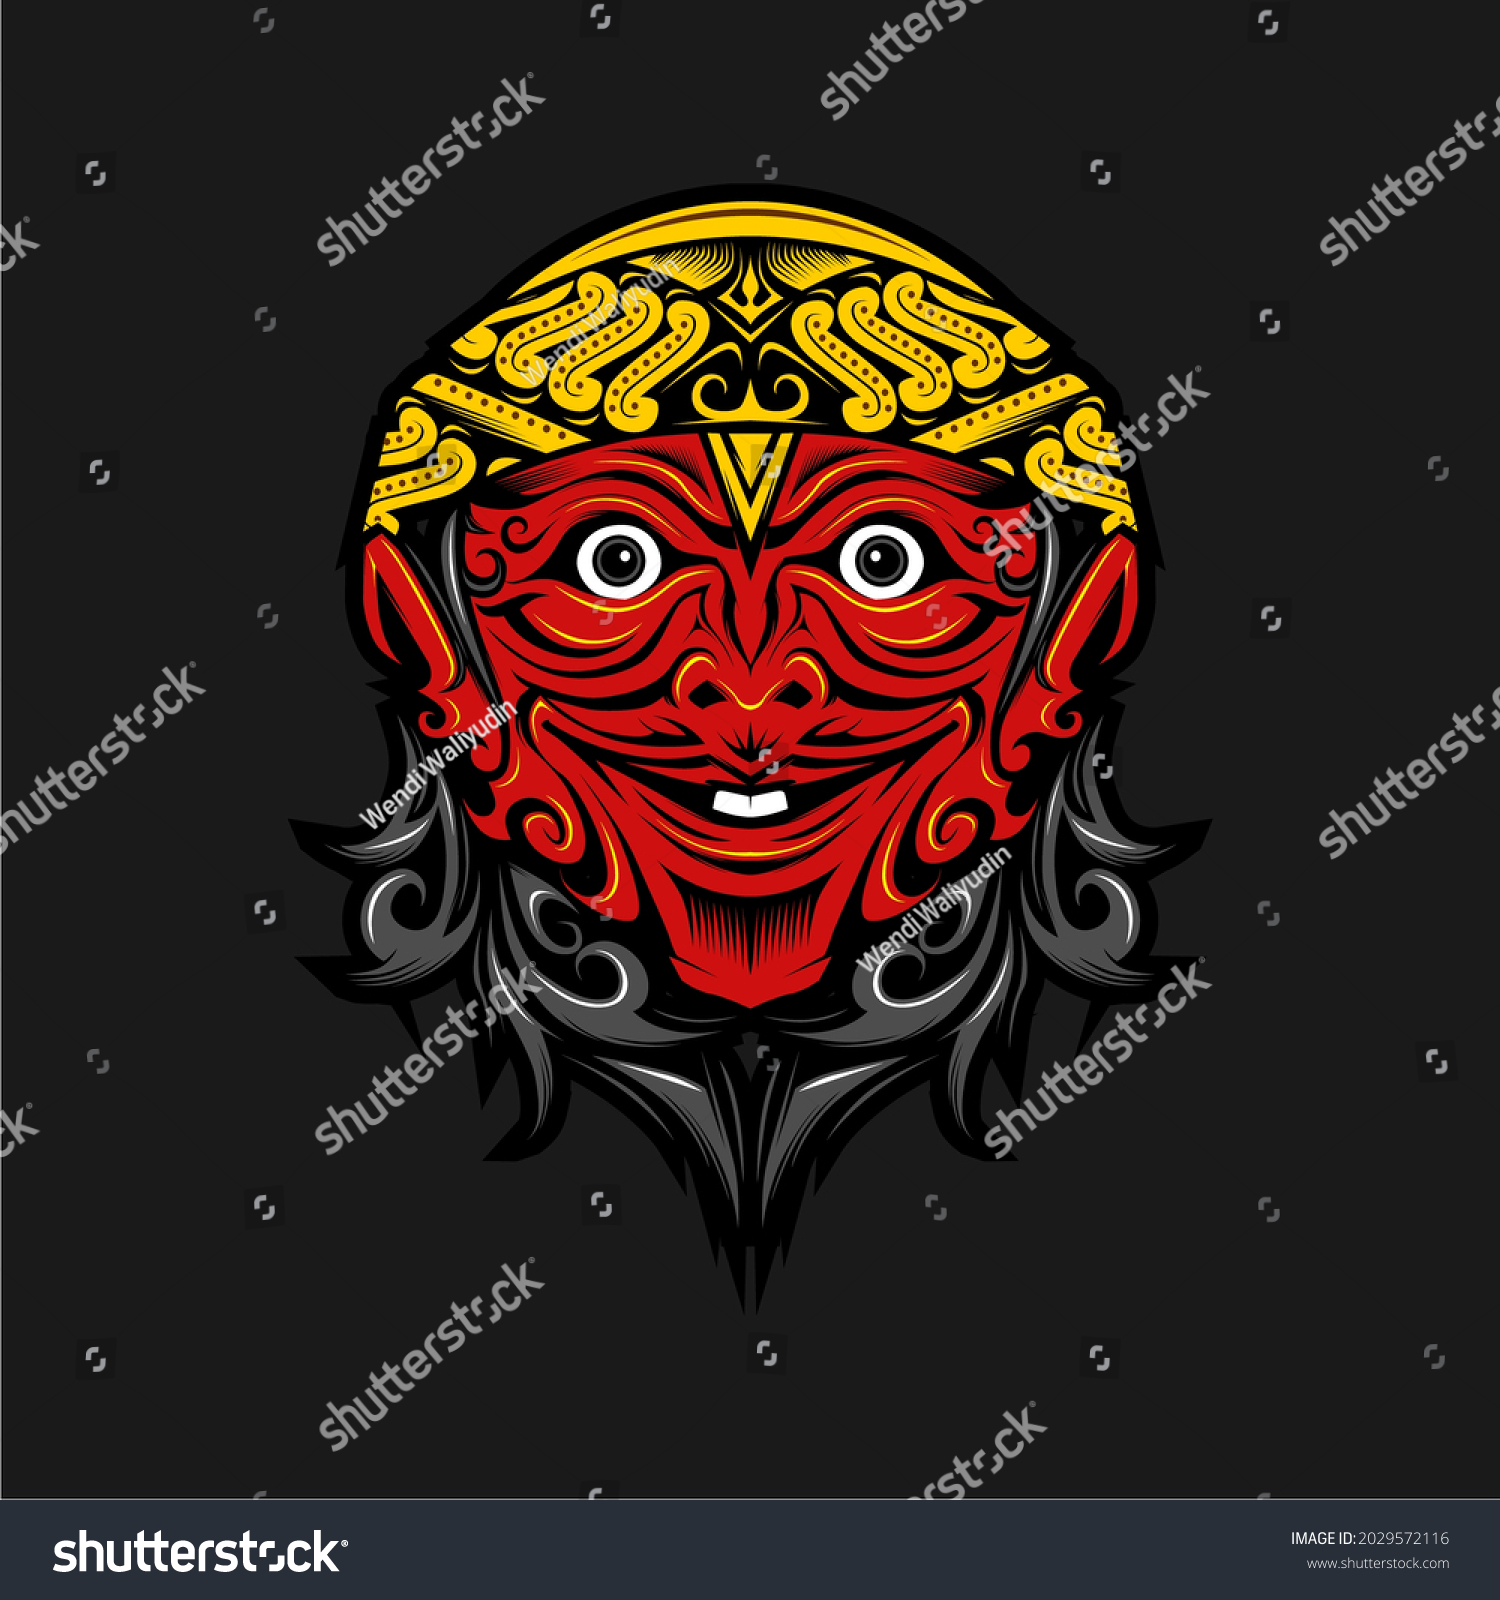 SVG of Cepot, famous Indonesian culture puppets stock vector svg